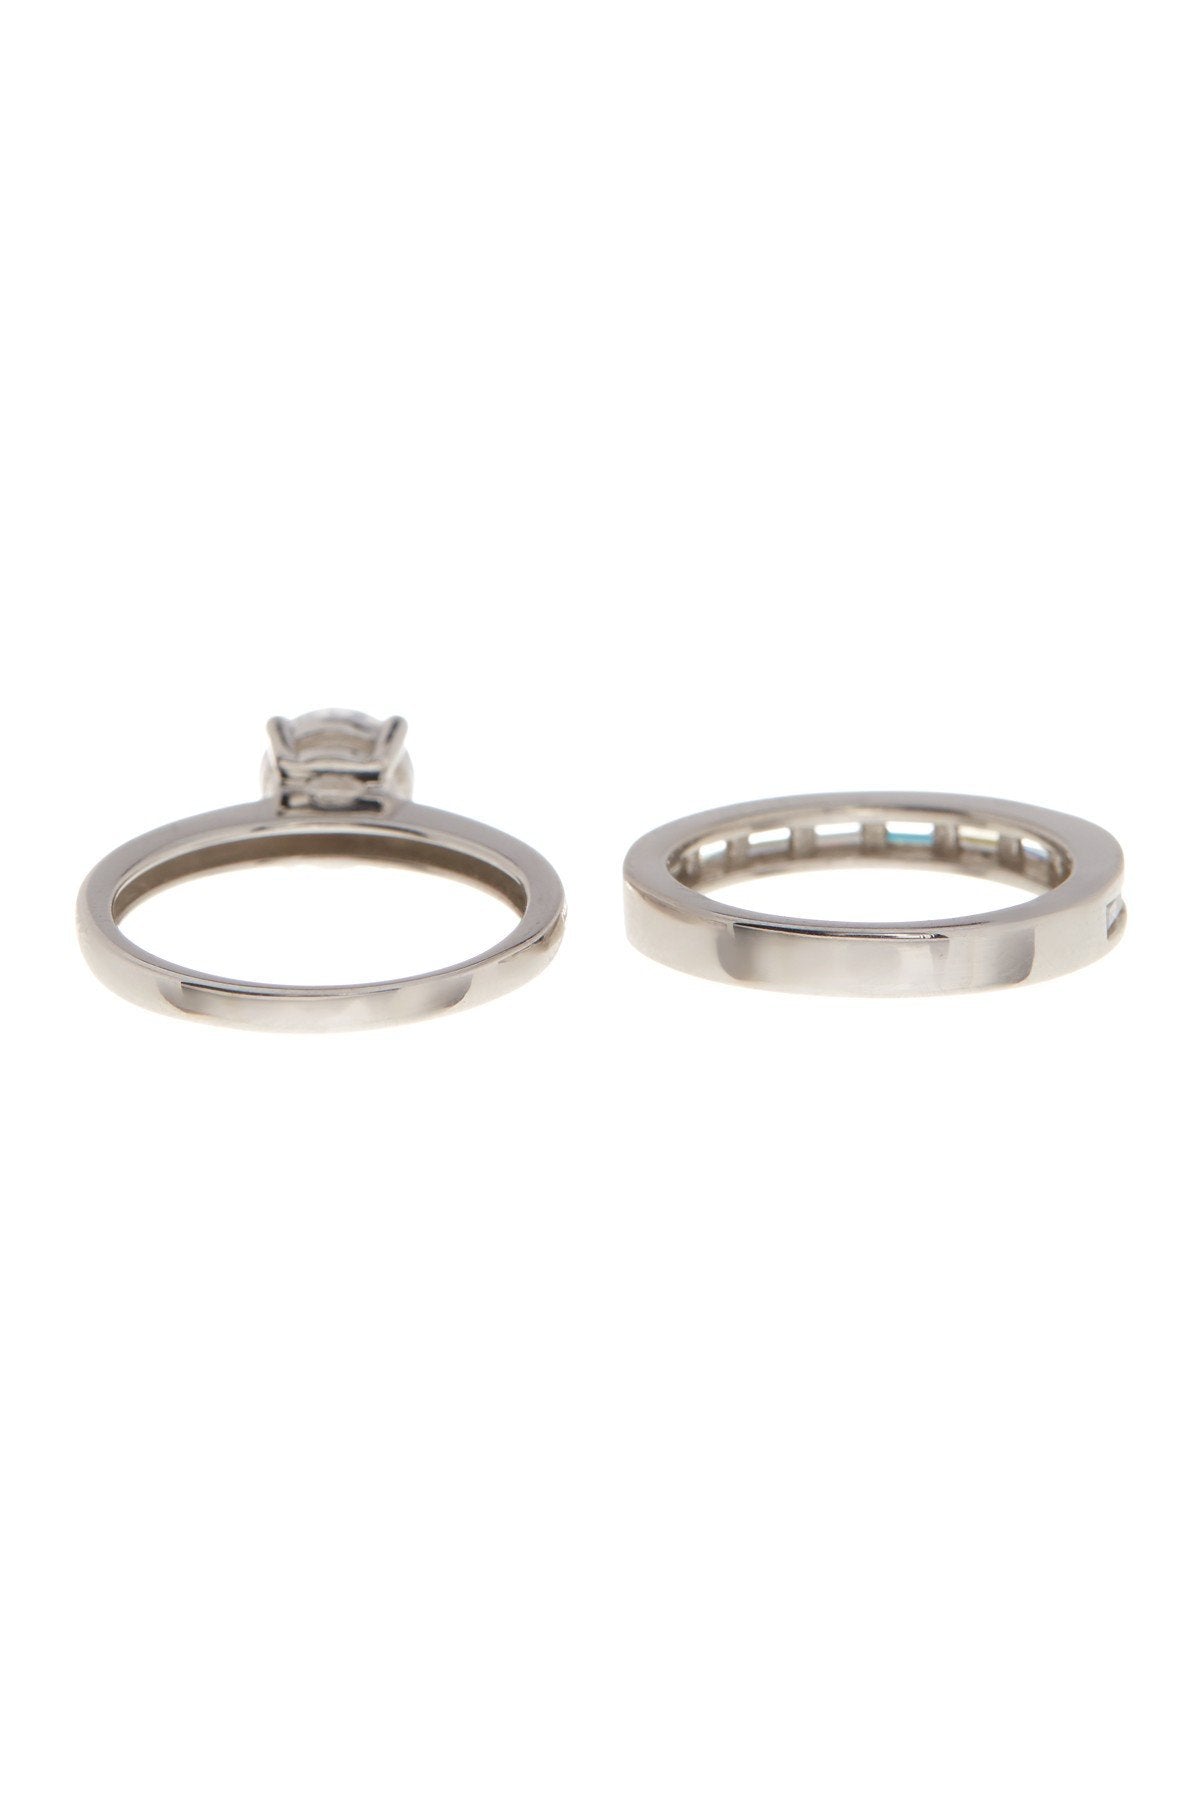 Sterling Silver Round CZ Solitaire Ring Set - Set of 2 - Sterling Forever